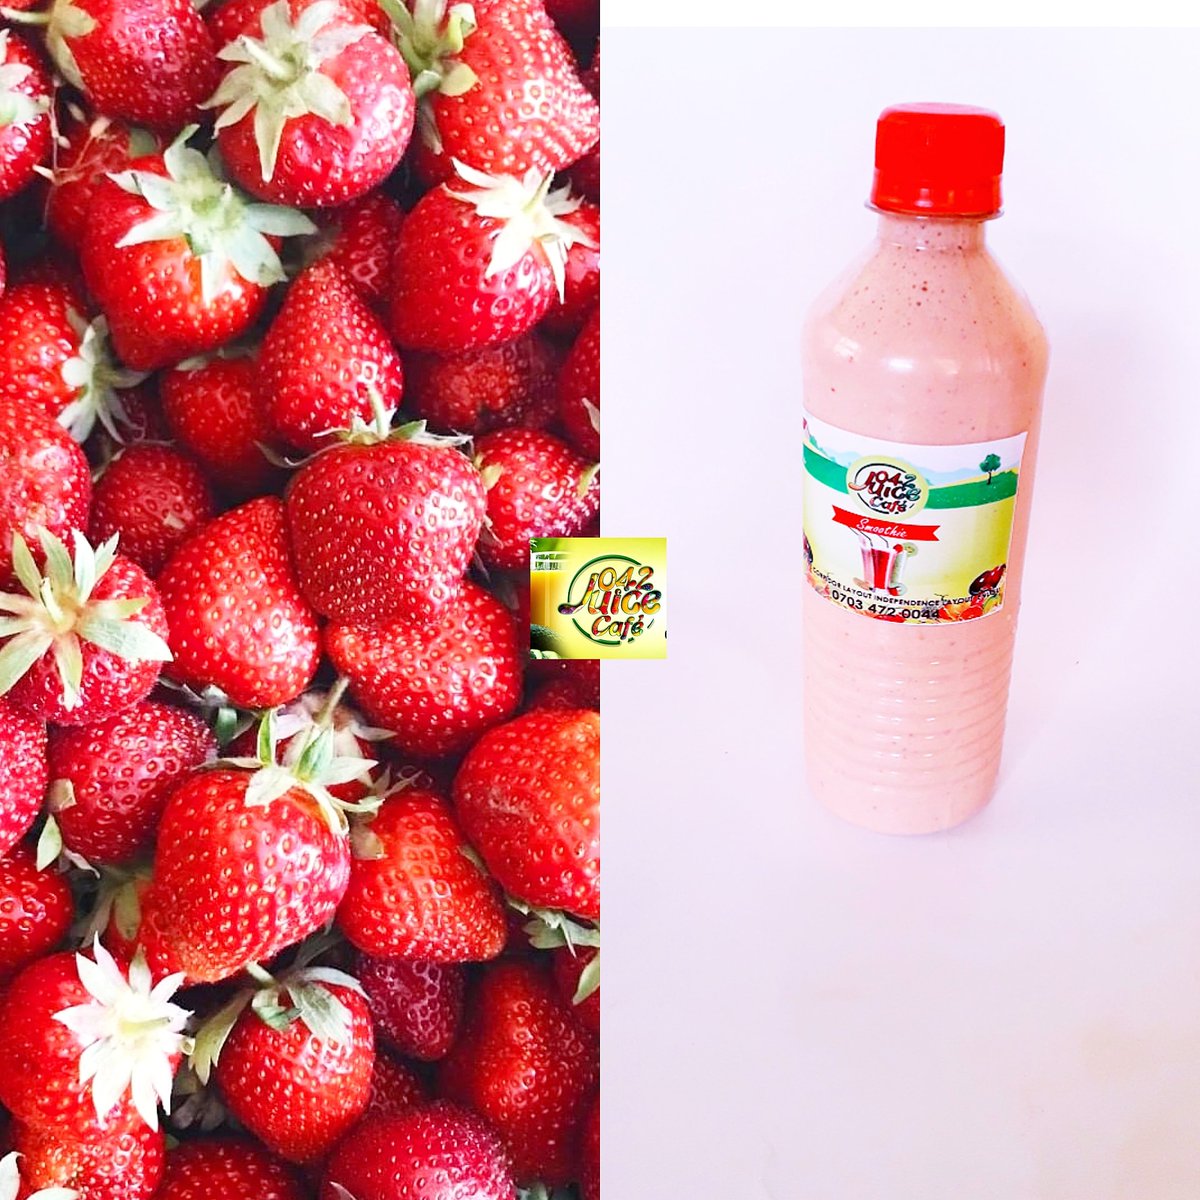 #strawberrysmoothie will be available today for delivery and pickup 
Its scarce but remember we are your plug for #bestsmoothie so anything for you

#FridayMotivation #myweekendmatters #shopwithtacha